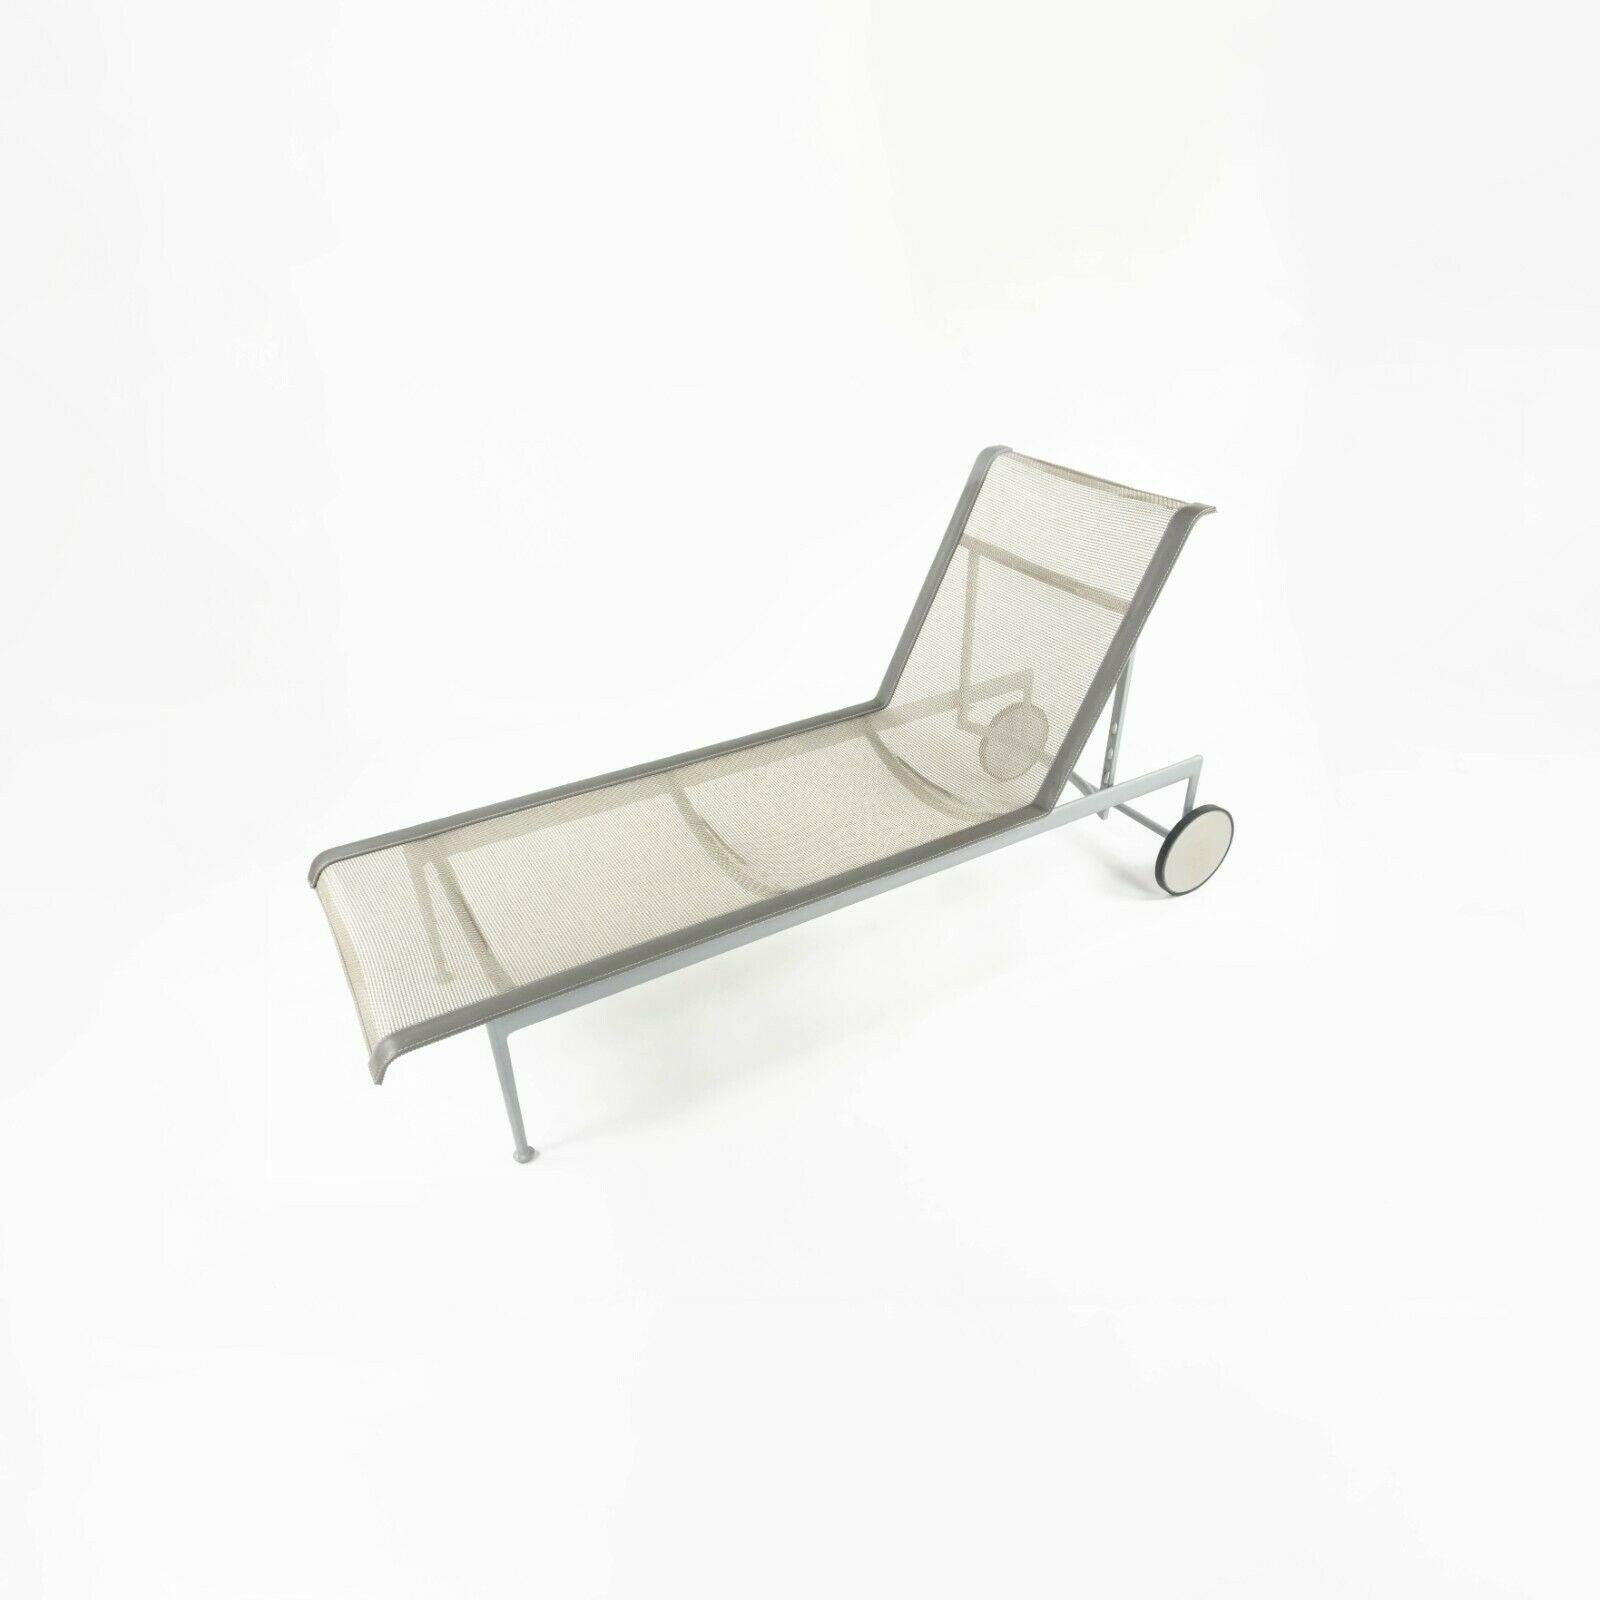 2012 Richard Schultz 1966 Series Adjustable Chaise Lounge Chair in Silver 2